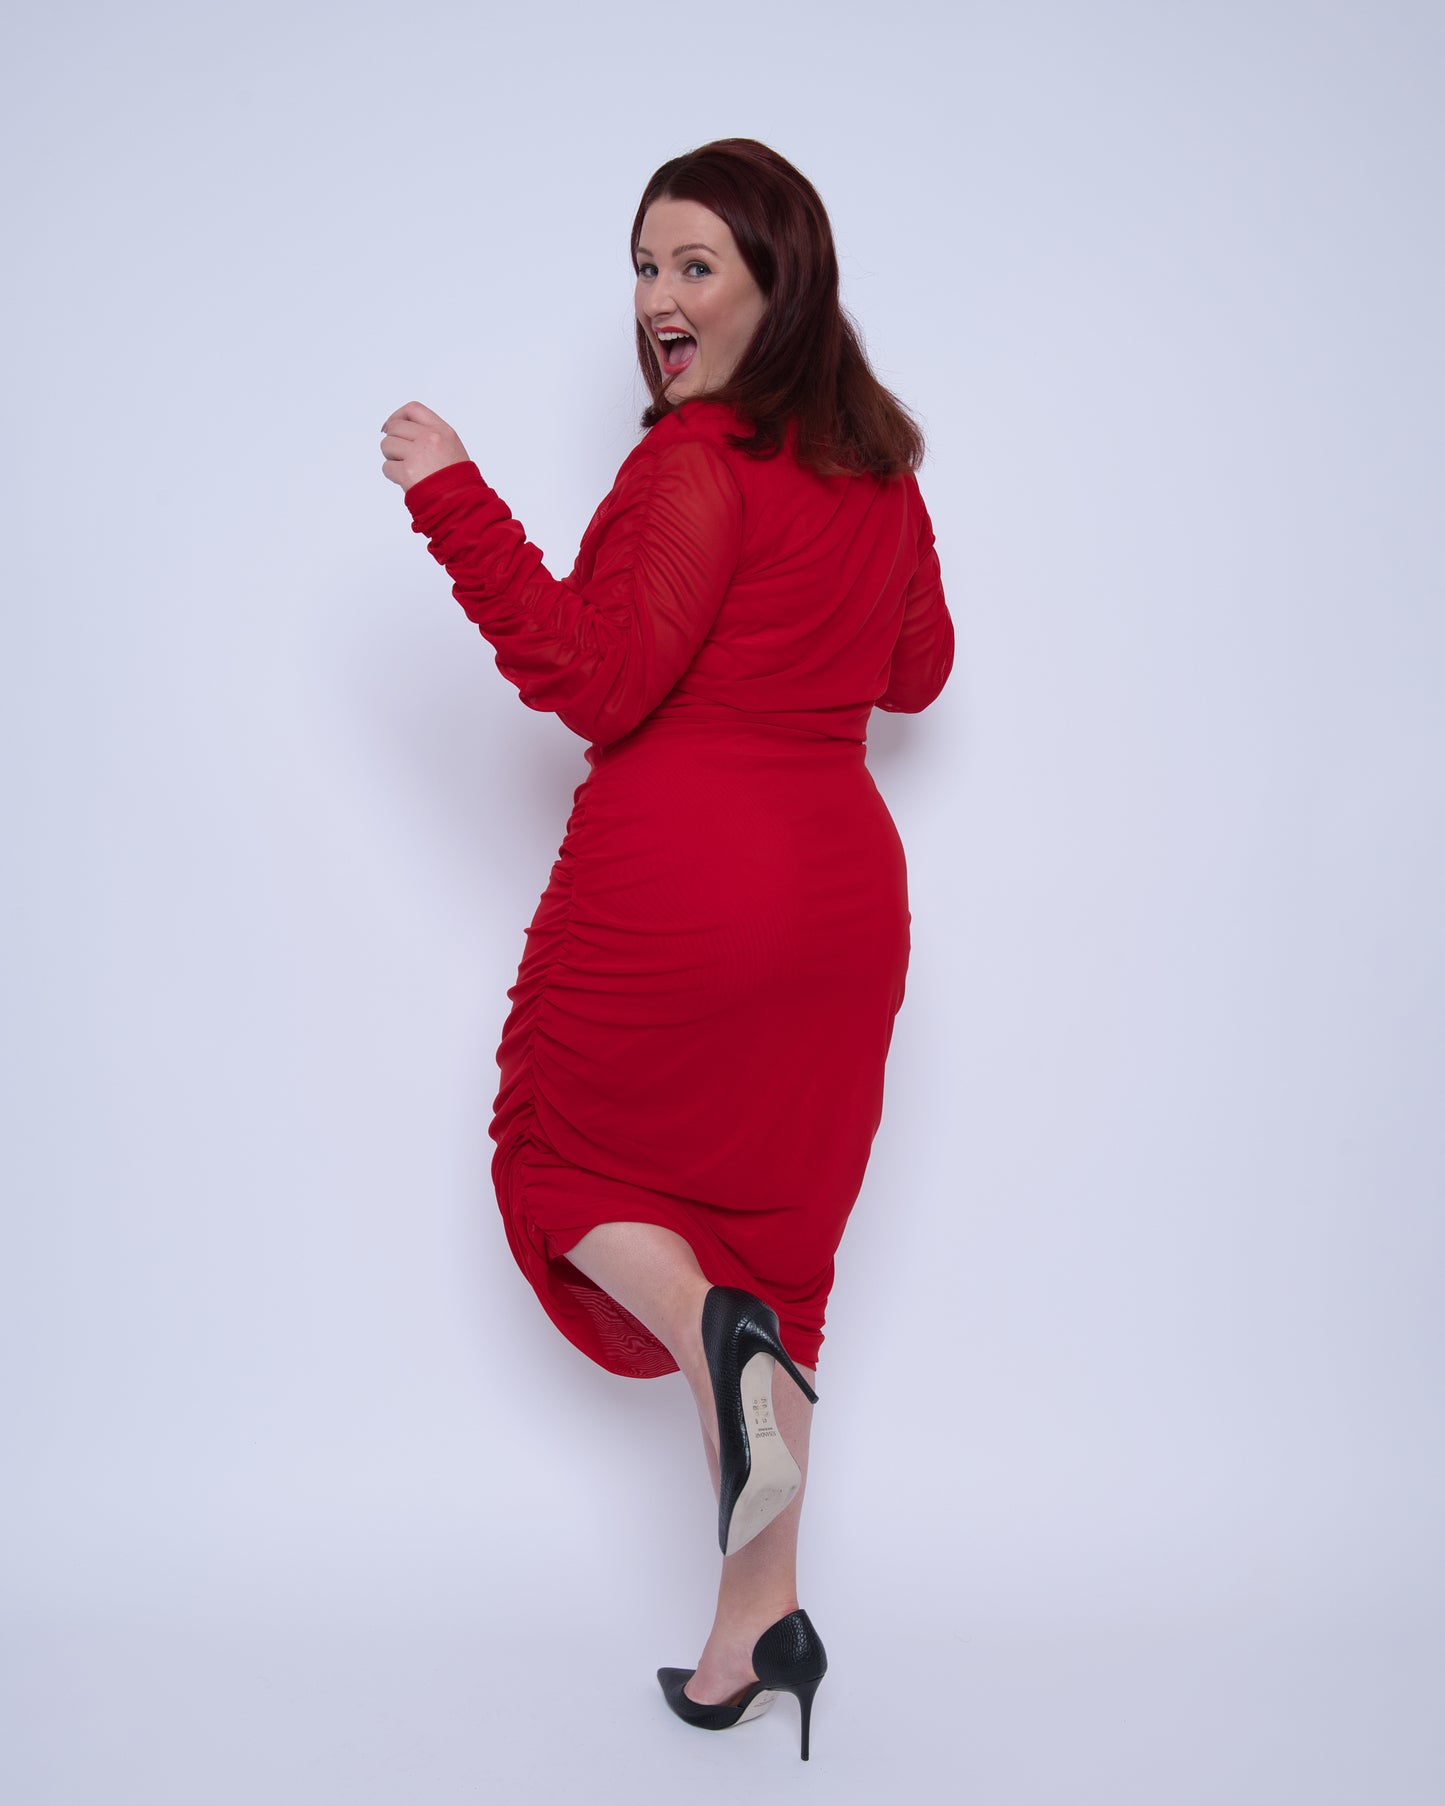 Women's Red Plus Size Boudicca Ruched Bodycon Midi Dress shown from the back, styled with black heels for a sophisticated, elegant look.